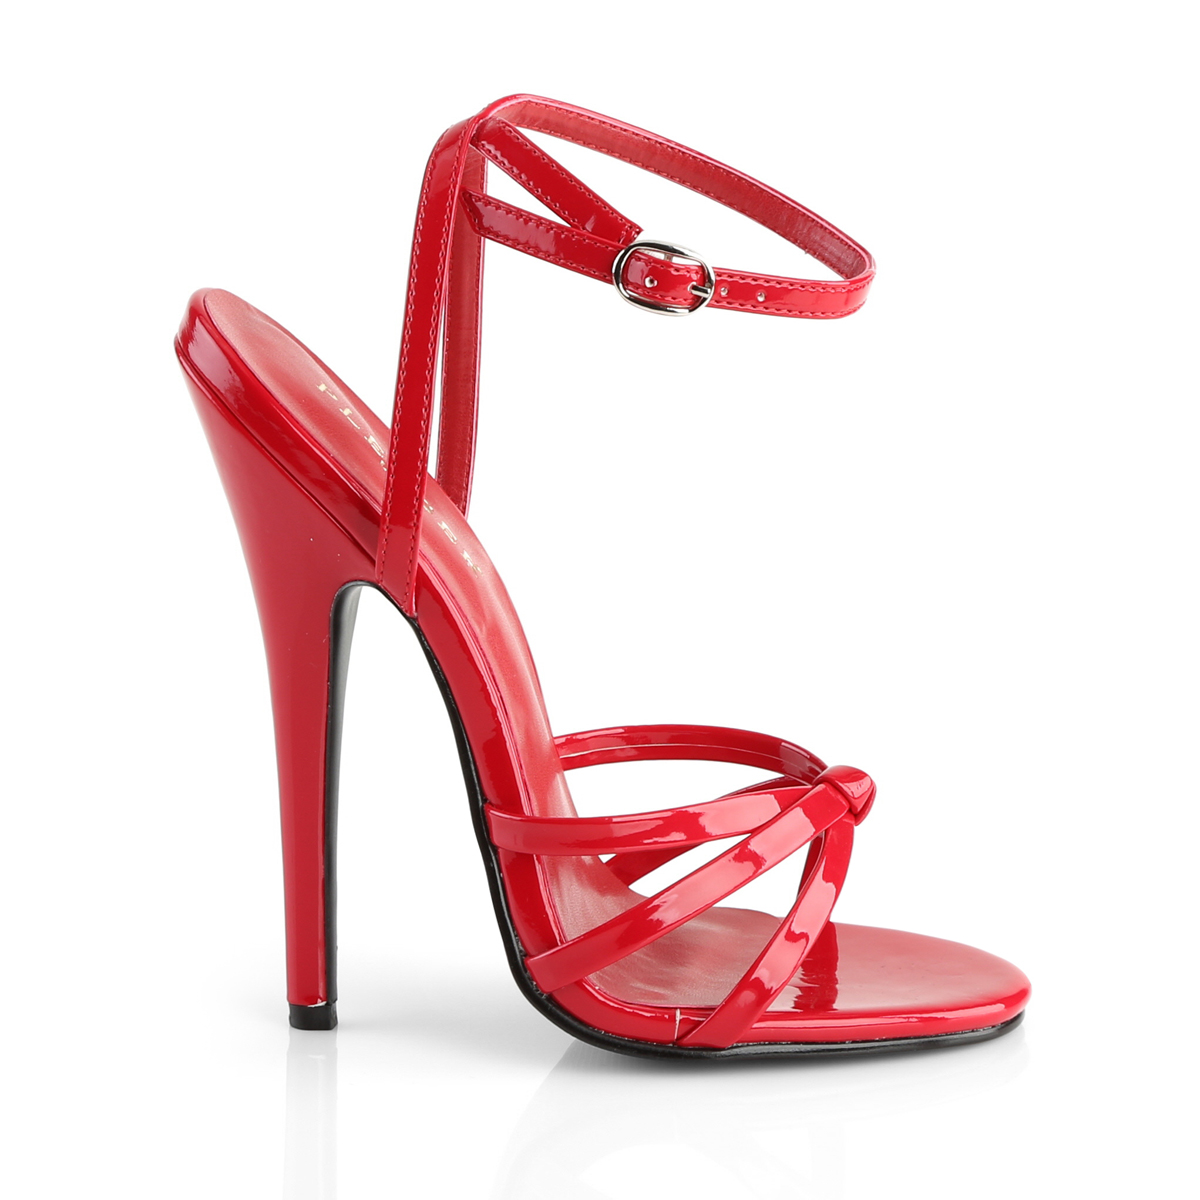 DOMINA-108 Devious high heels ankle wrap sandal red patent - Schuh ...